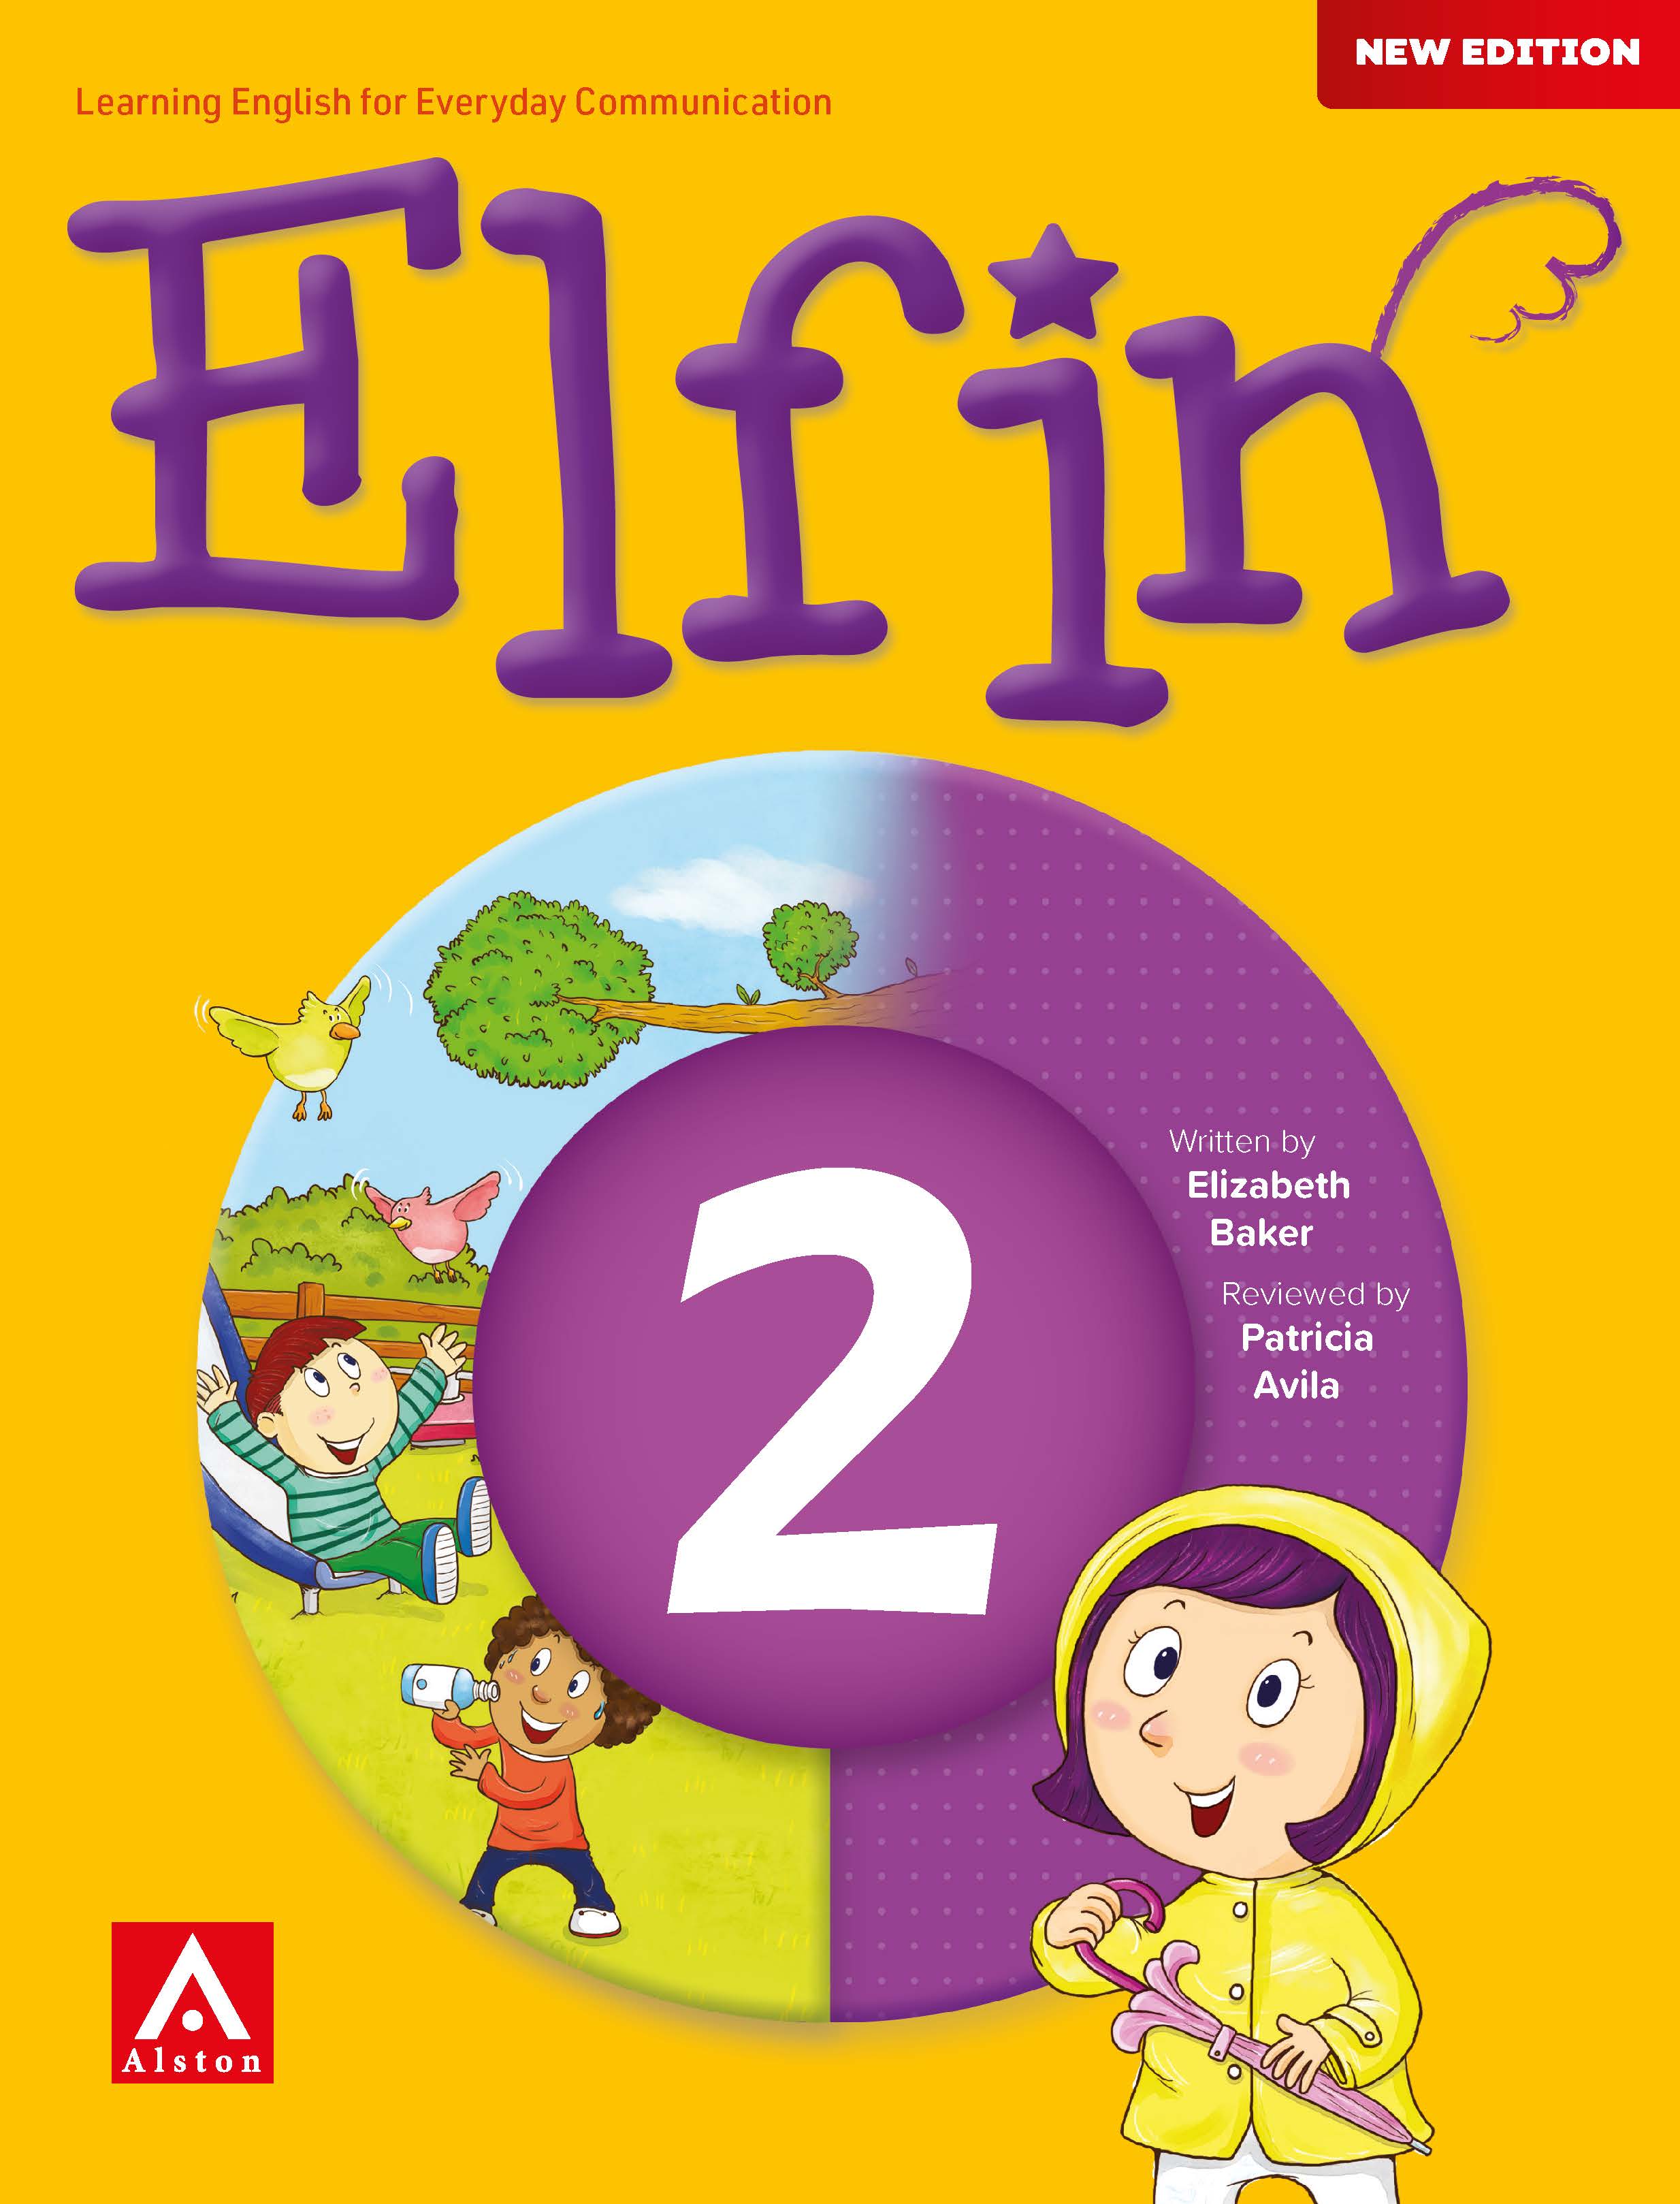 Elfin New Edition Cover SB TG 1 6 Page 02